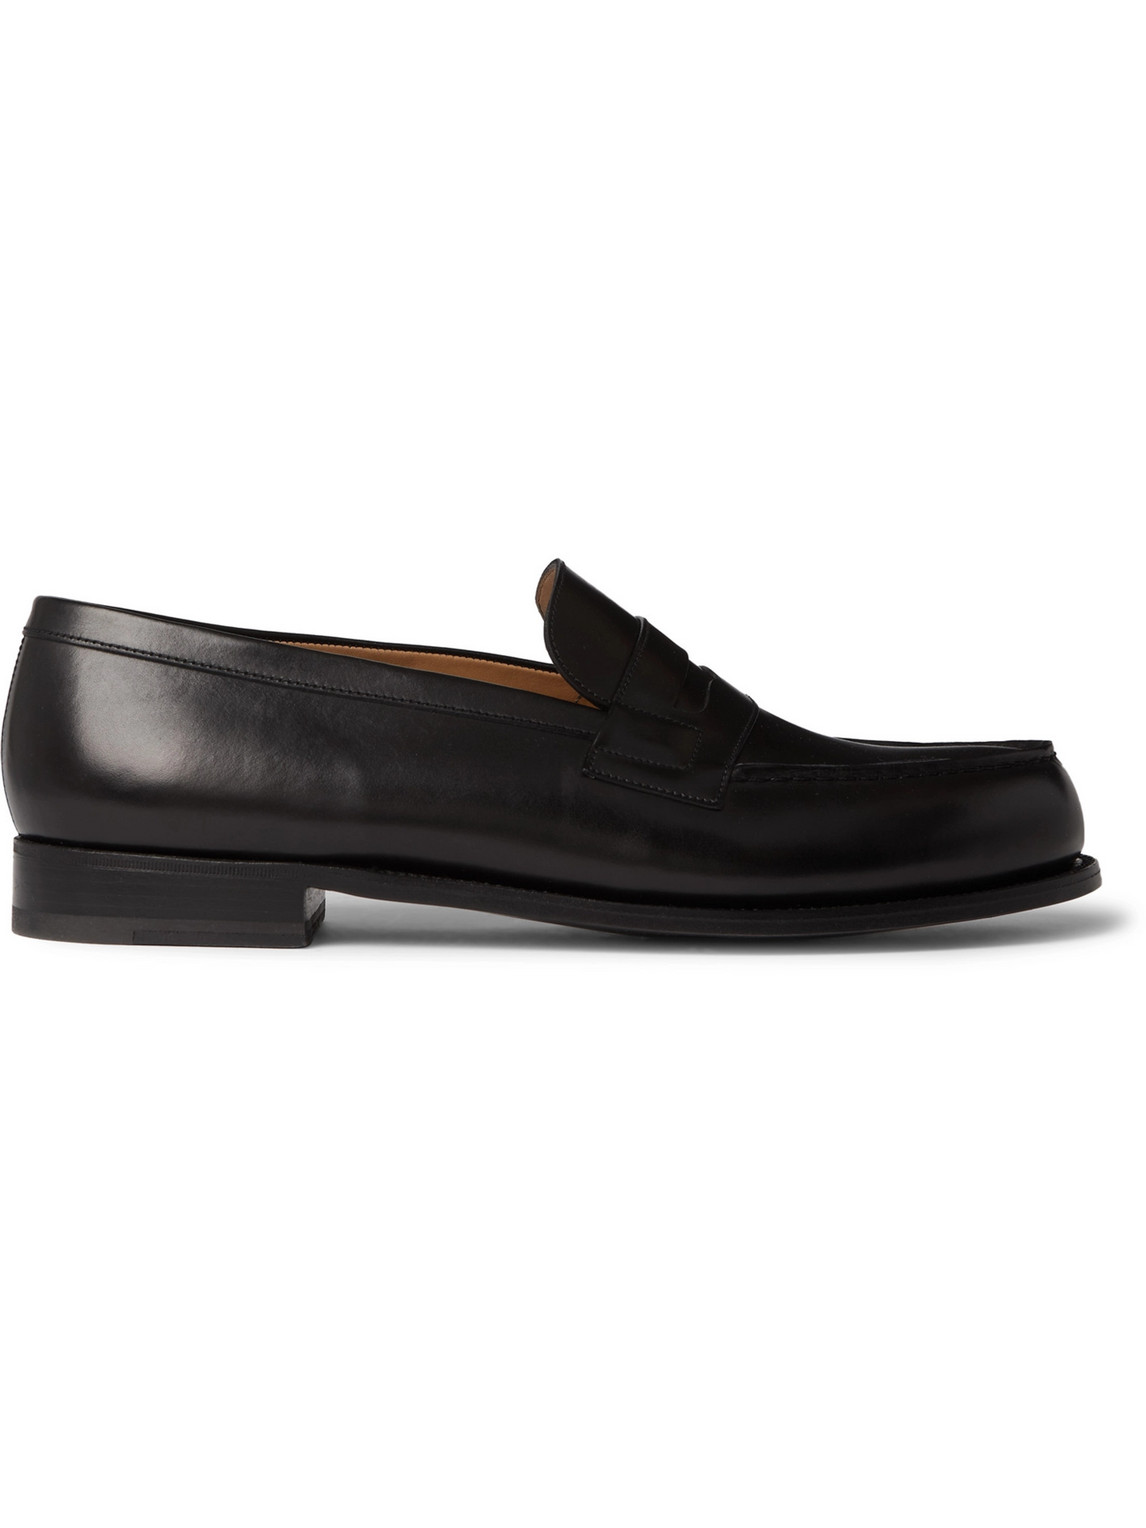 Jm Weston 180 Moccasin Leather Loafers In Black